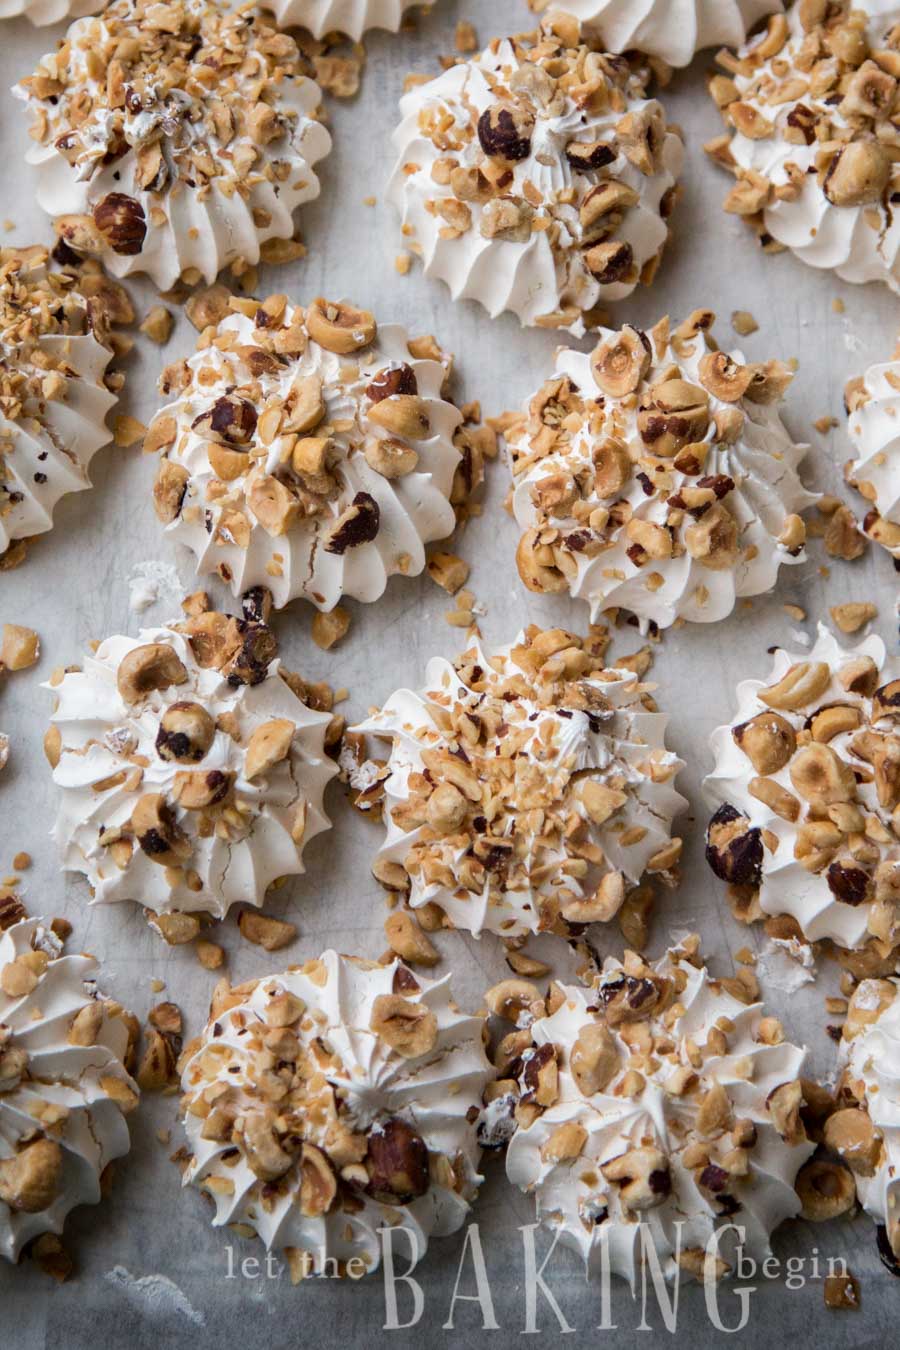 Hazelnut Meringue Bomb - Combination of Crunchy Hazelnut Meringue and Dulce De Leche Custard Buttercream creates an explosion of flavor, that is going to be a memorable dessert experience. Believe me! | By Let the Baking Begin!